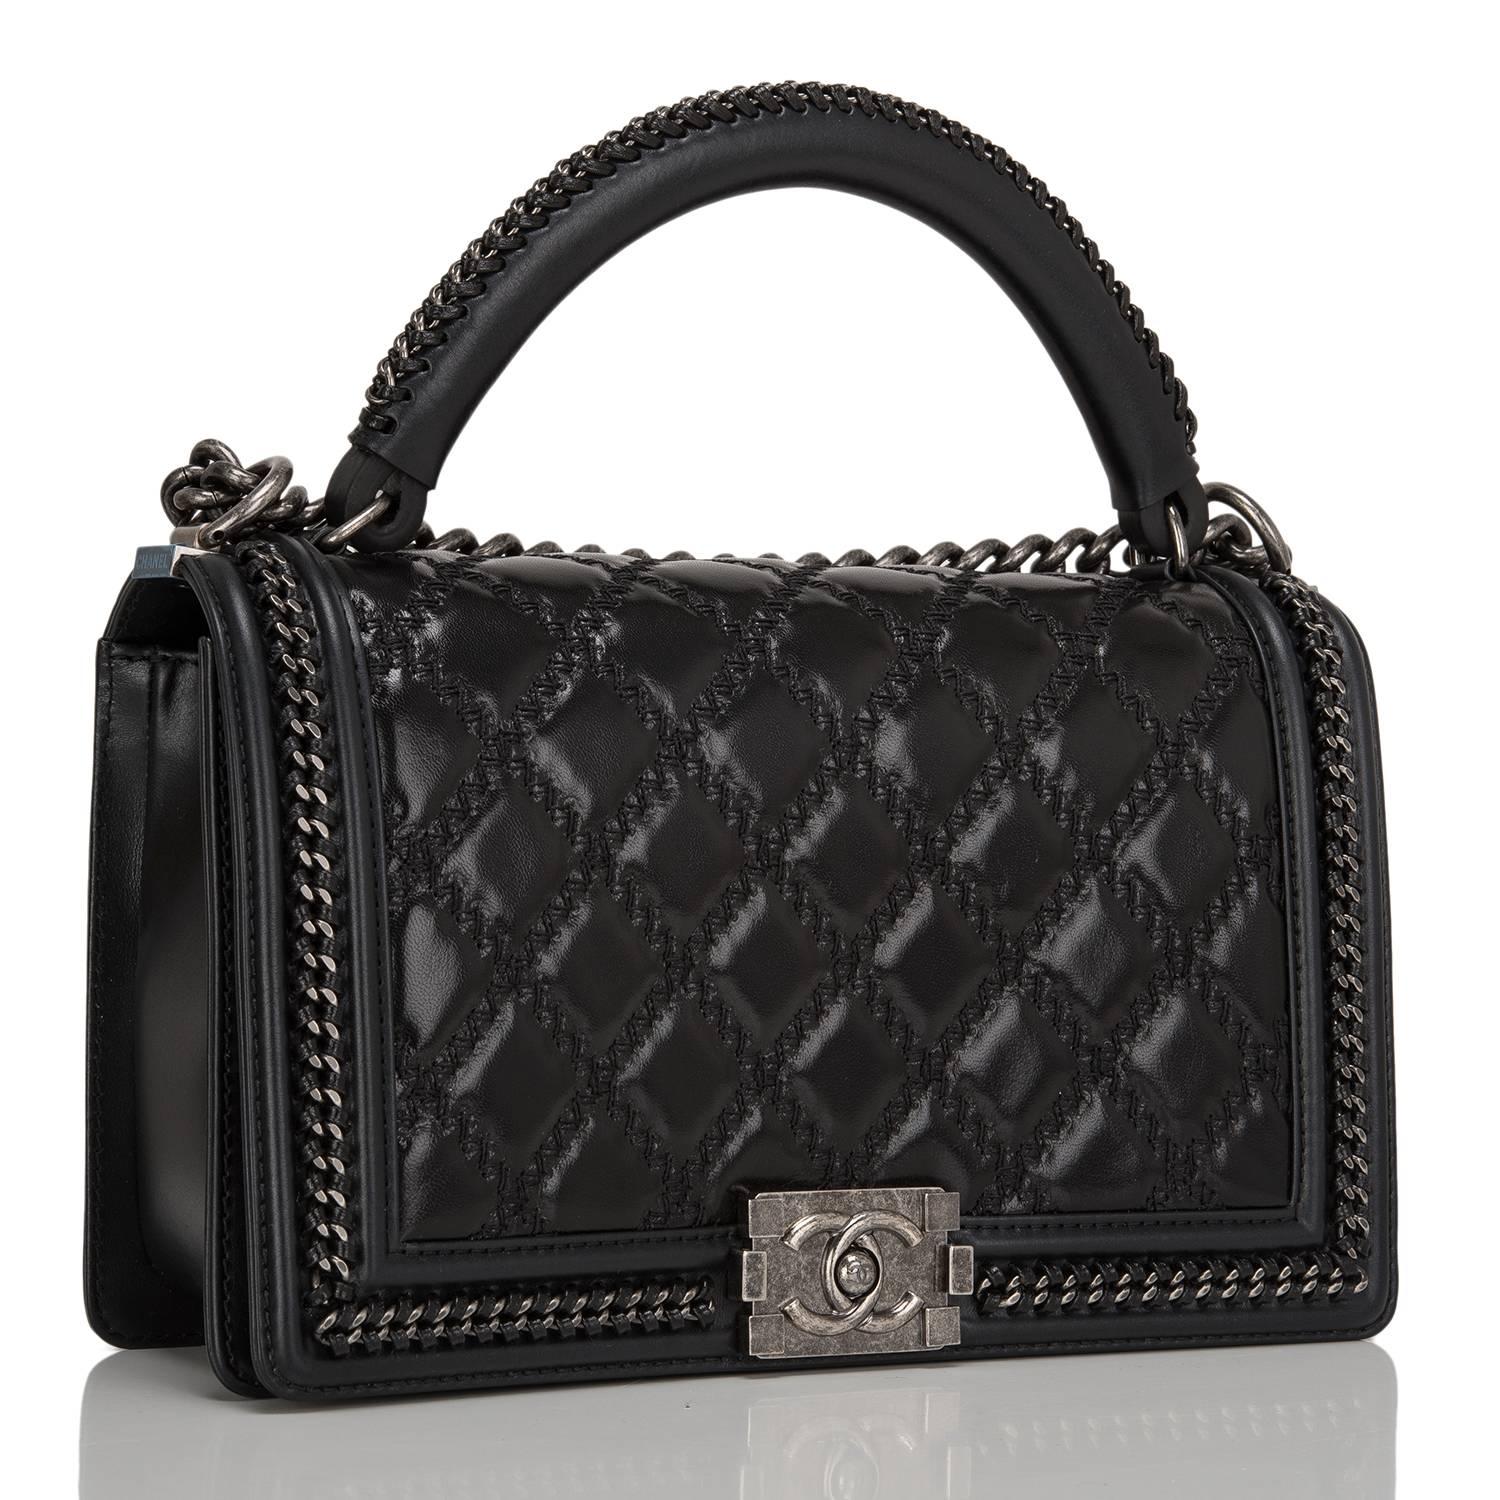 This Chanel New Medium Boy bag with a top handle is made of shiny goatskin leather and accented with aged ruthenium hardware.

The bag features a limited edition braided leather and chain top handle, a full front flap with the Boy signature CC